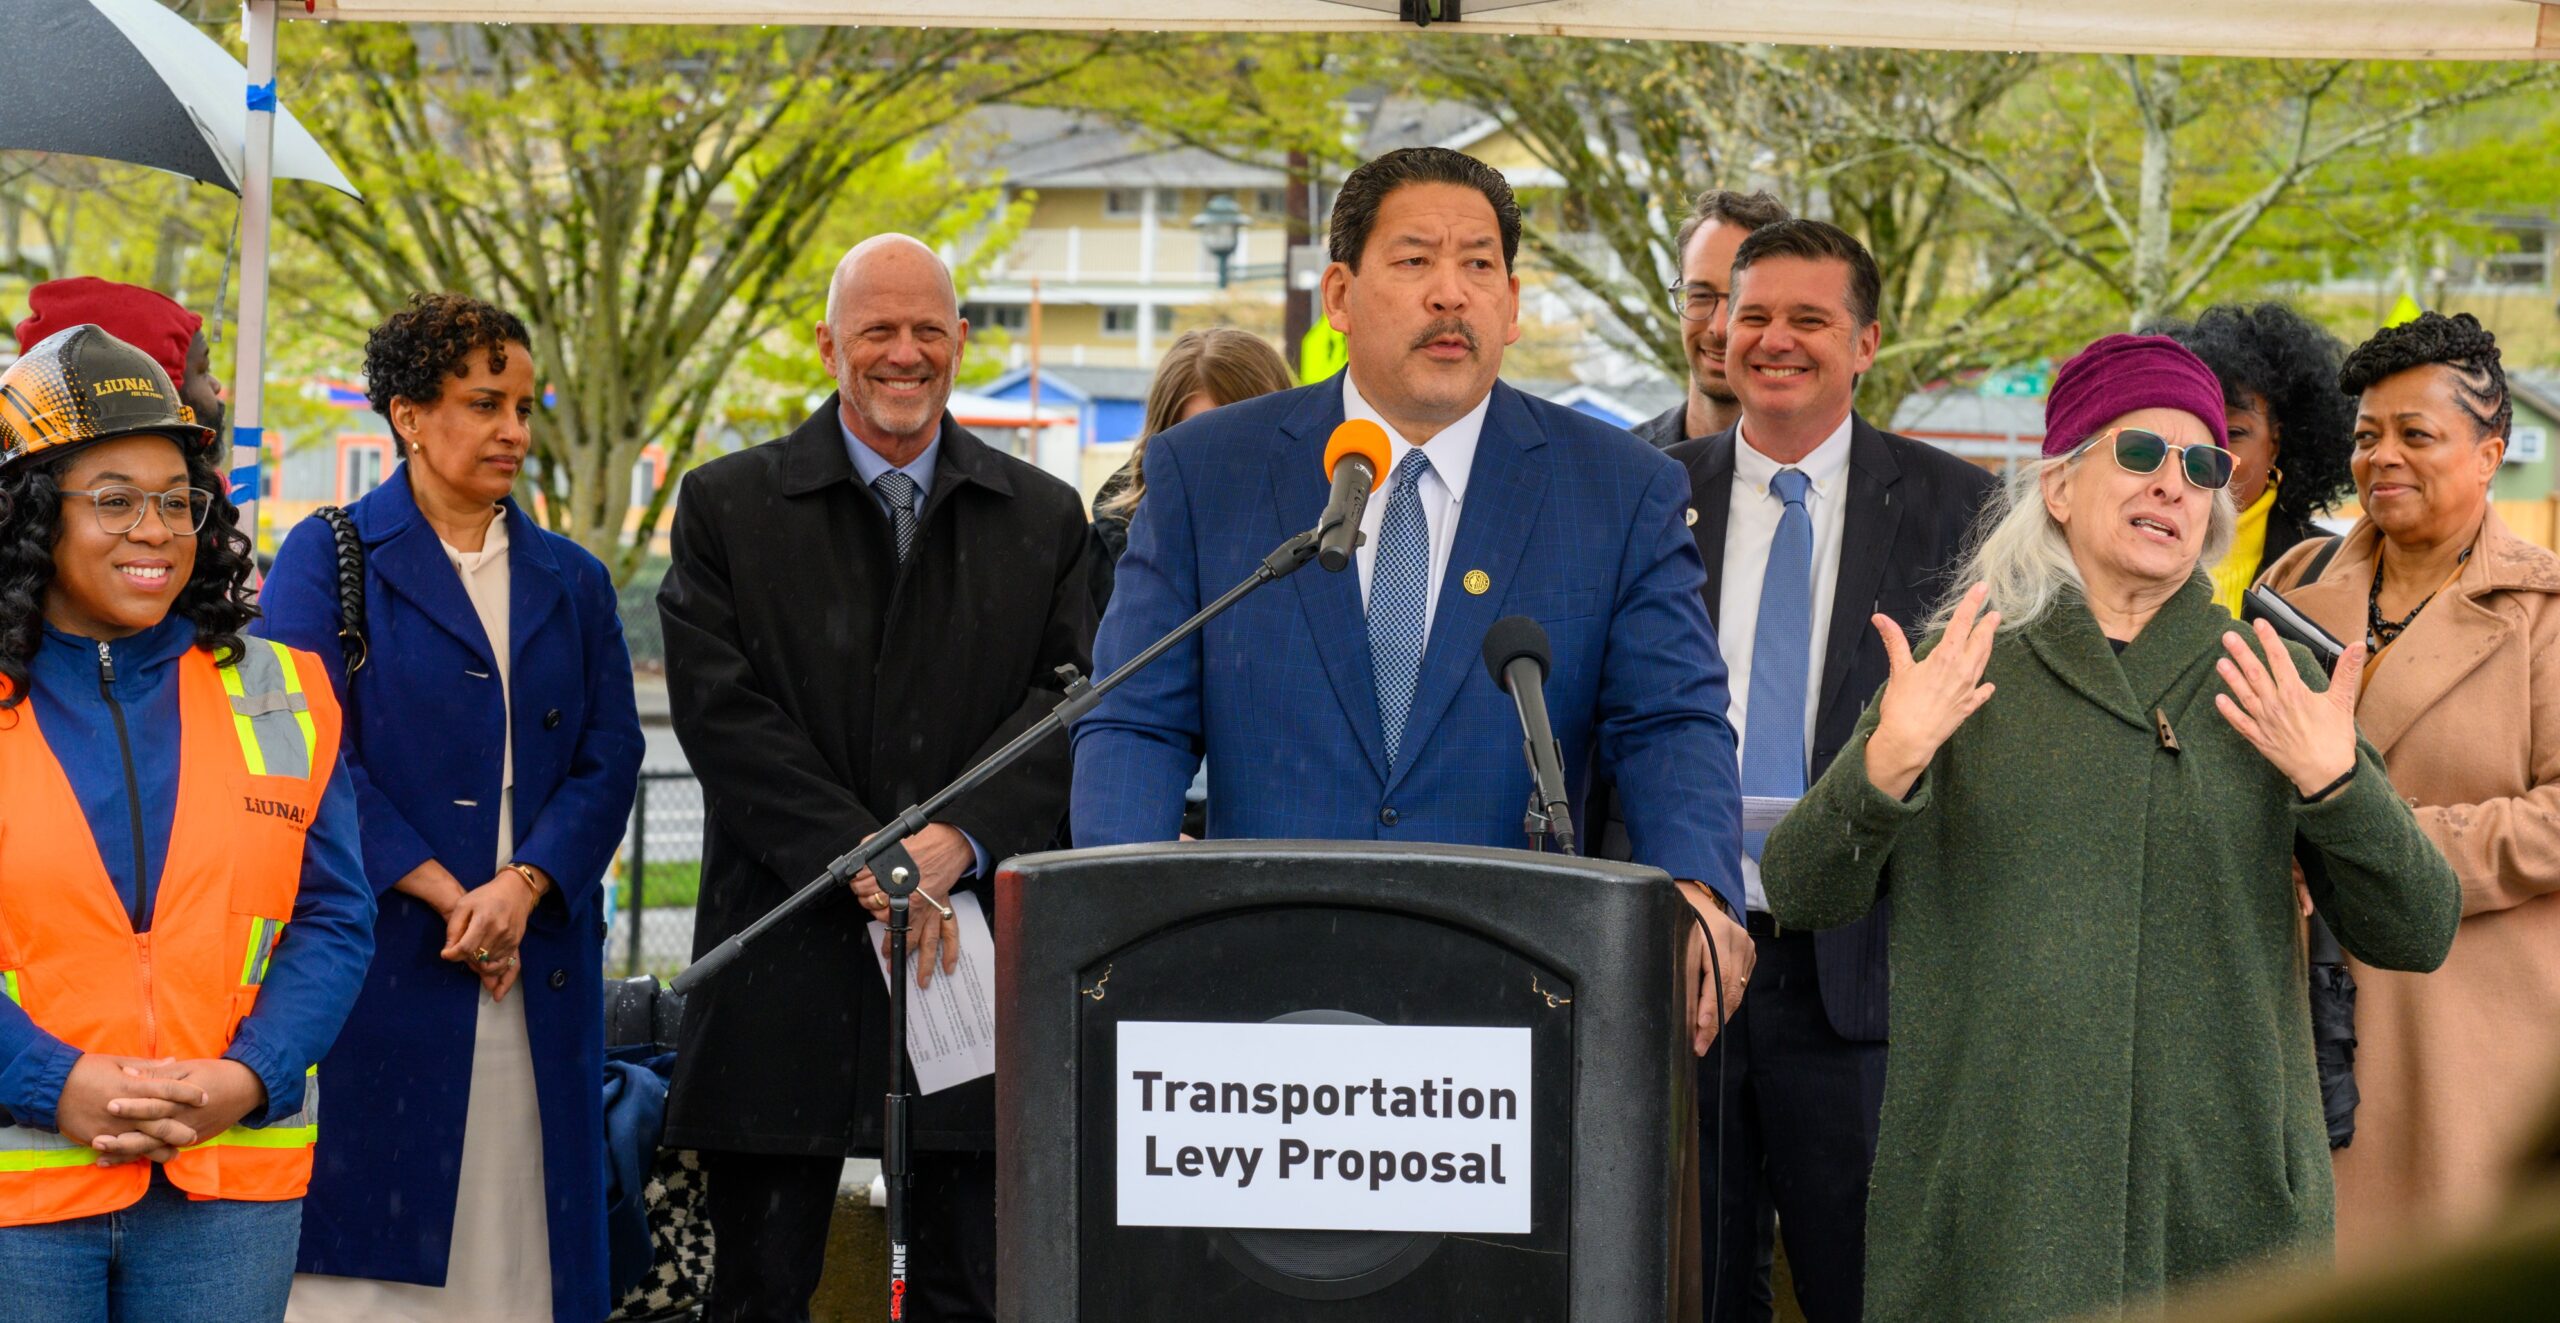 Mayor Harrell at podium for Transportation Levy with local transportation leaders in background